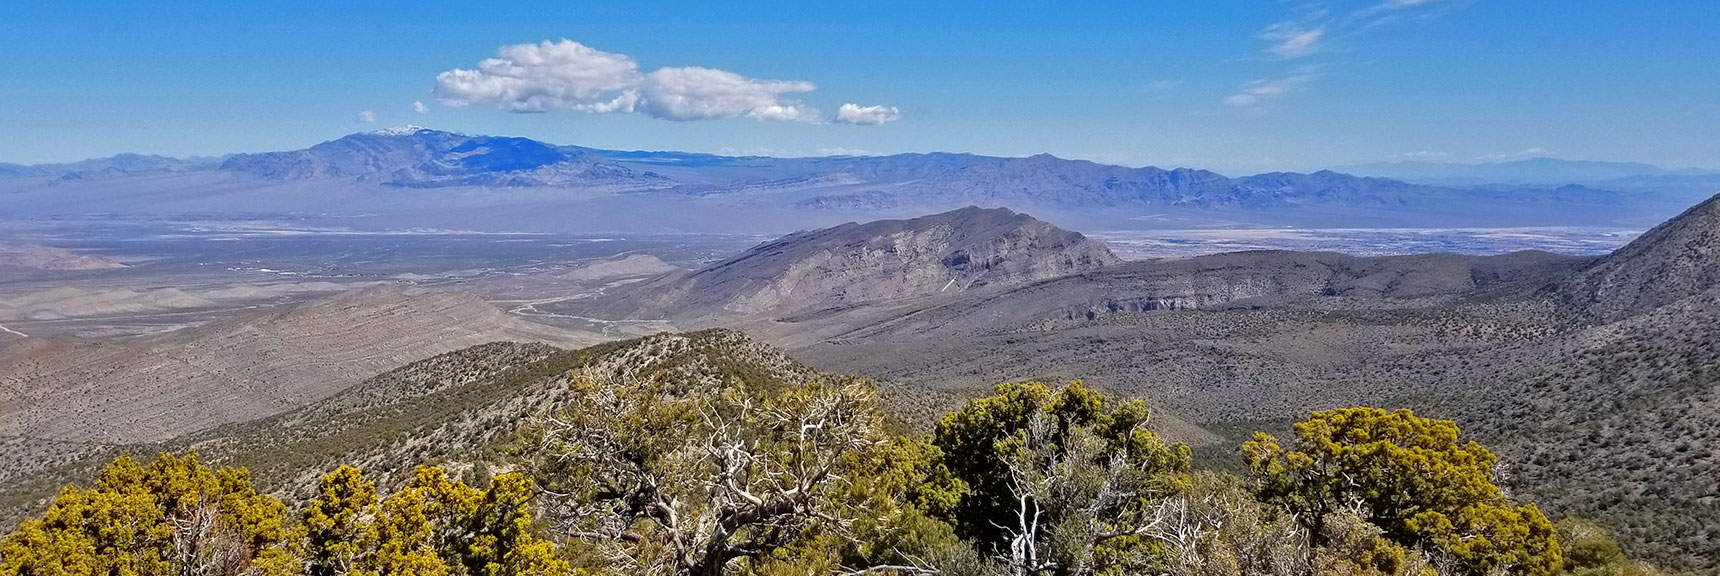 View of Sheep Range, Gass Peak and North Las Vegas Valley from Just North of La Madre Mt., Nevada